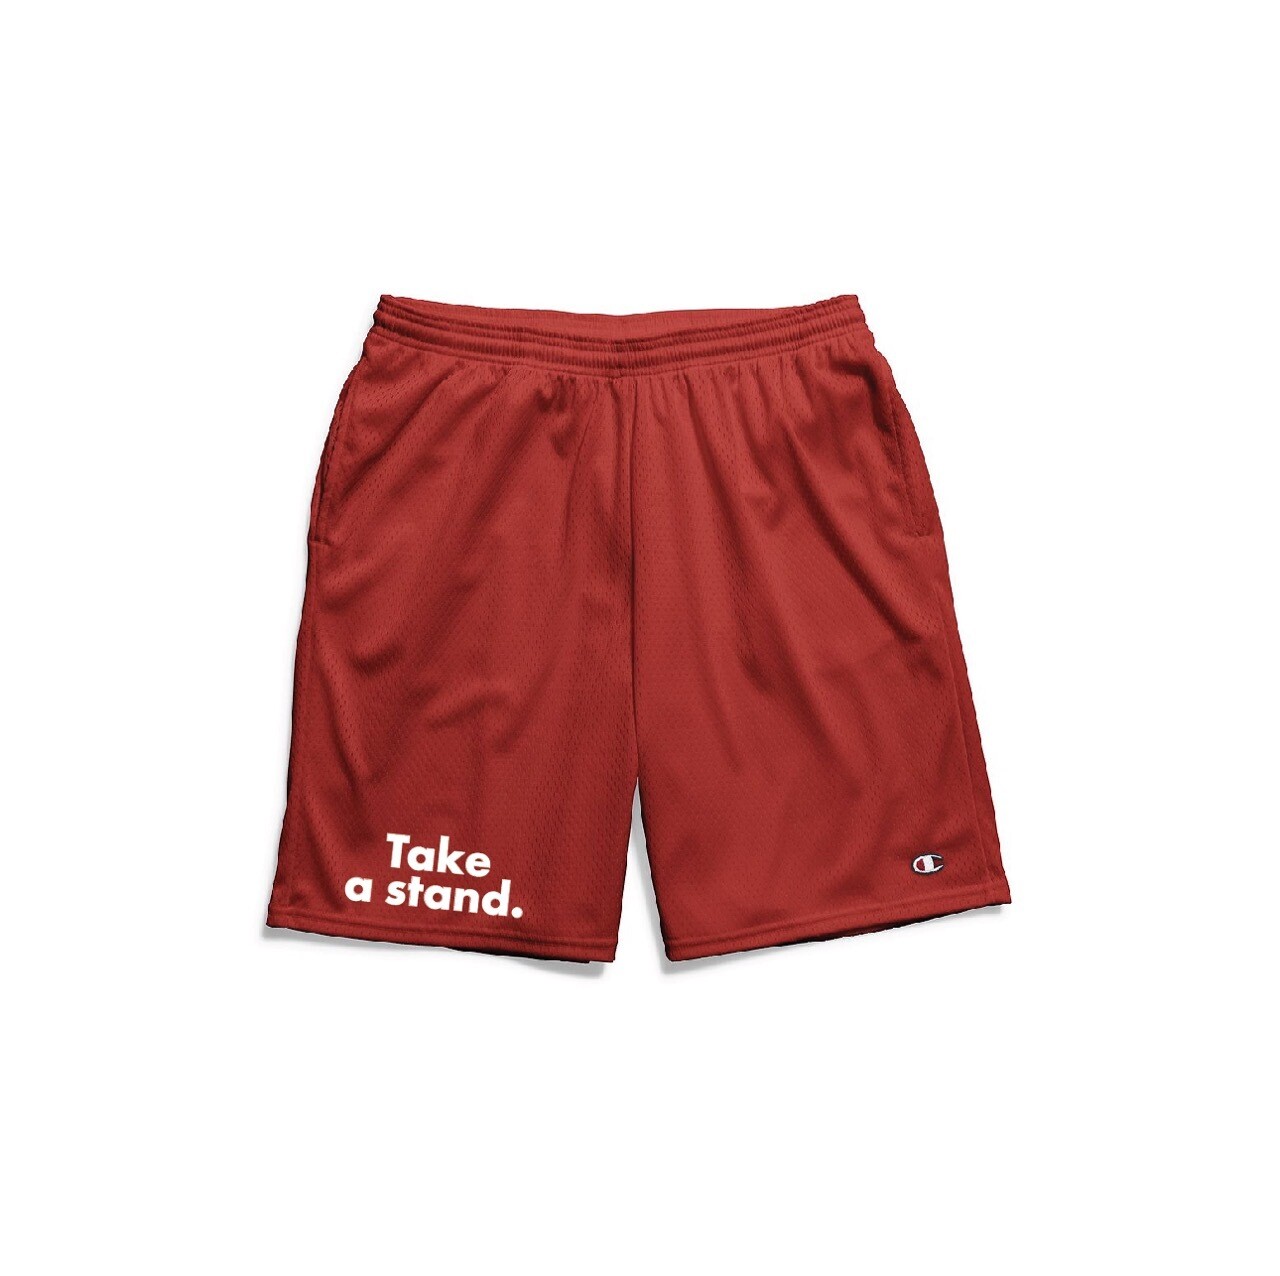 (202) Take A Stand Shorts, Size: S